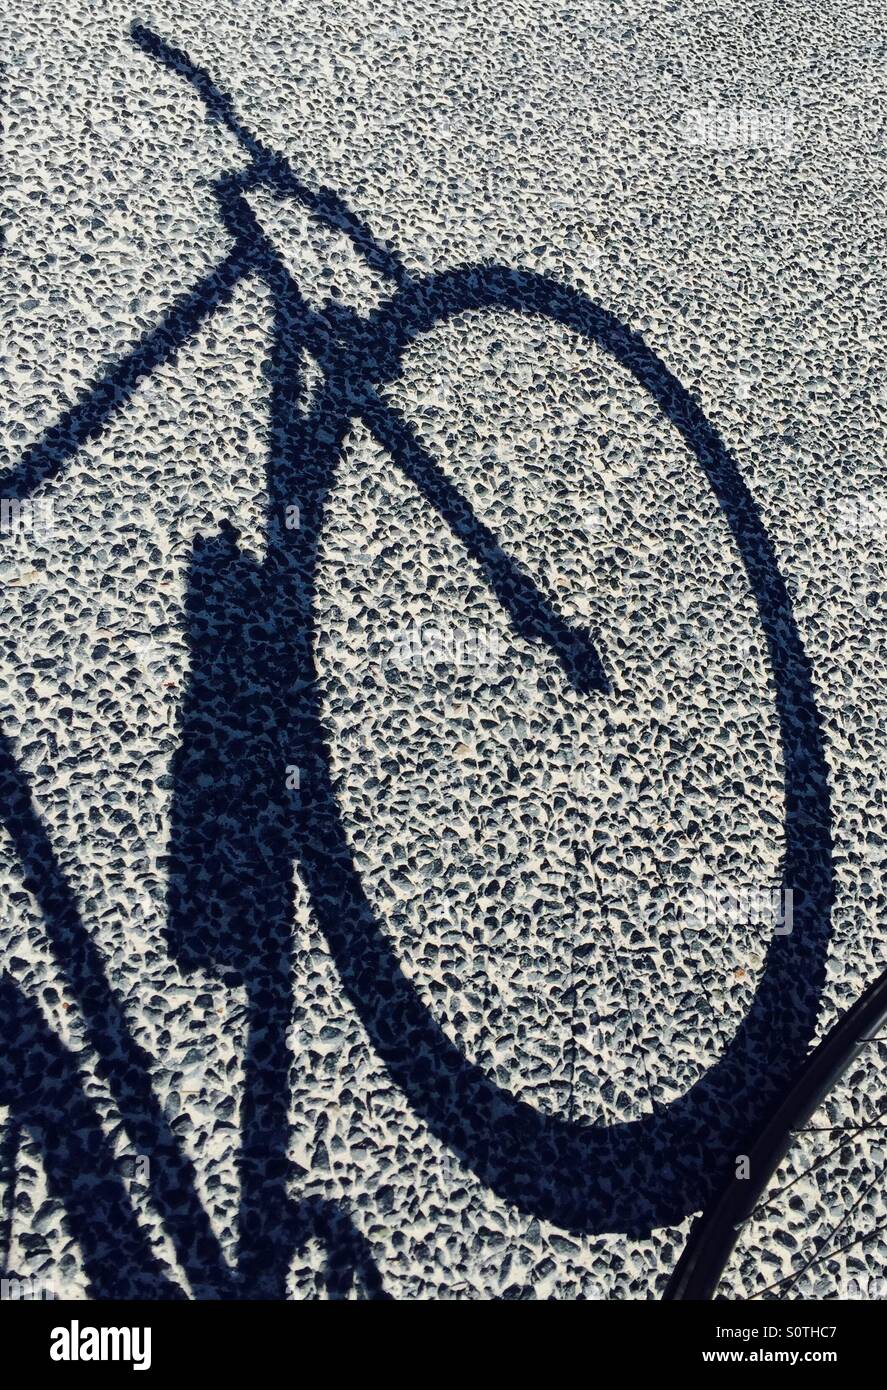 Silhouette of bicycle on road Stock Photo